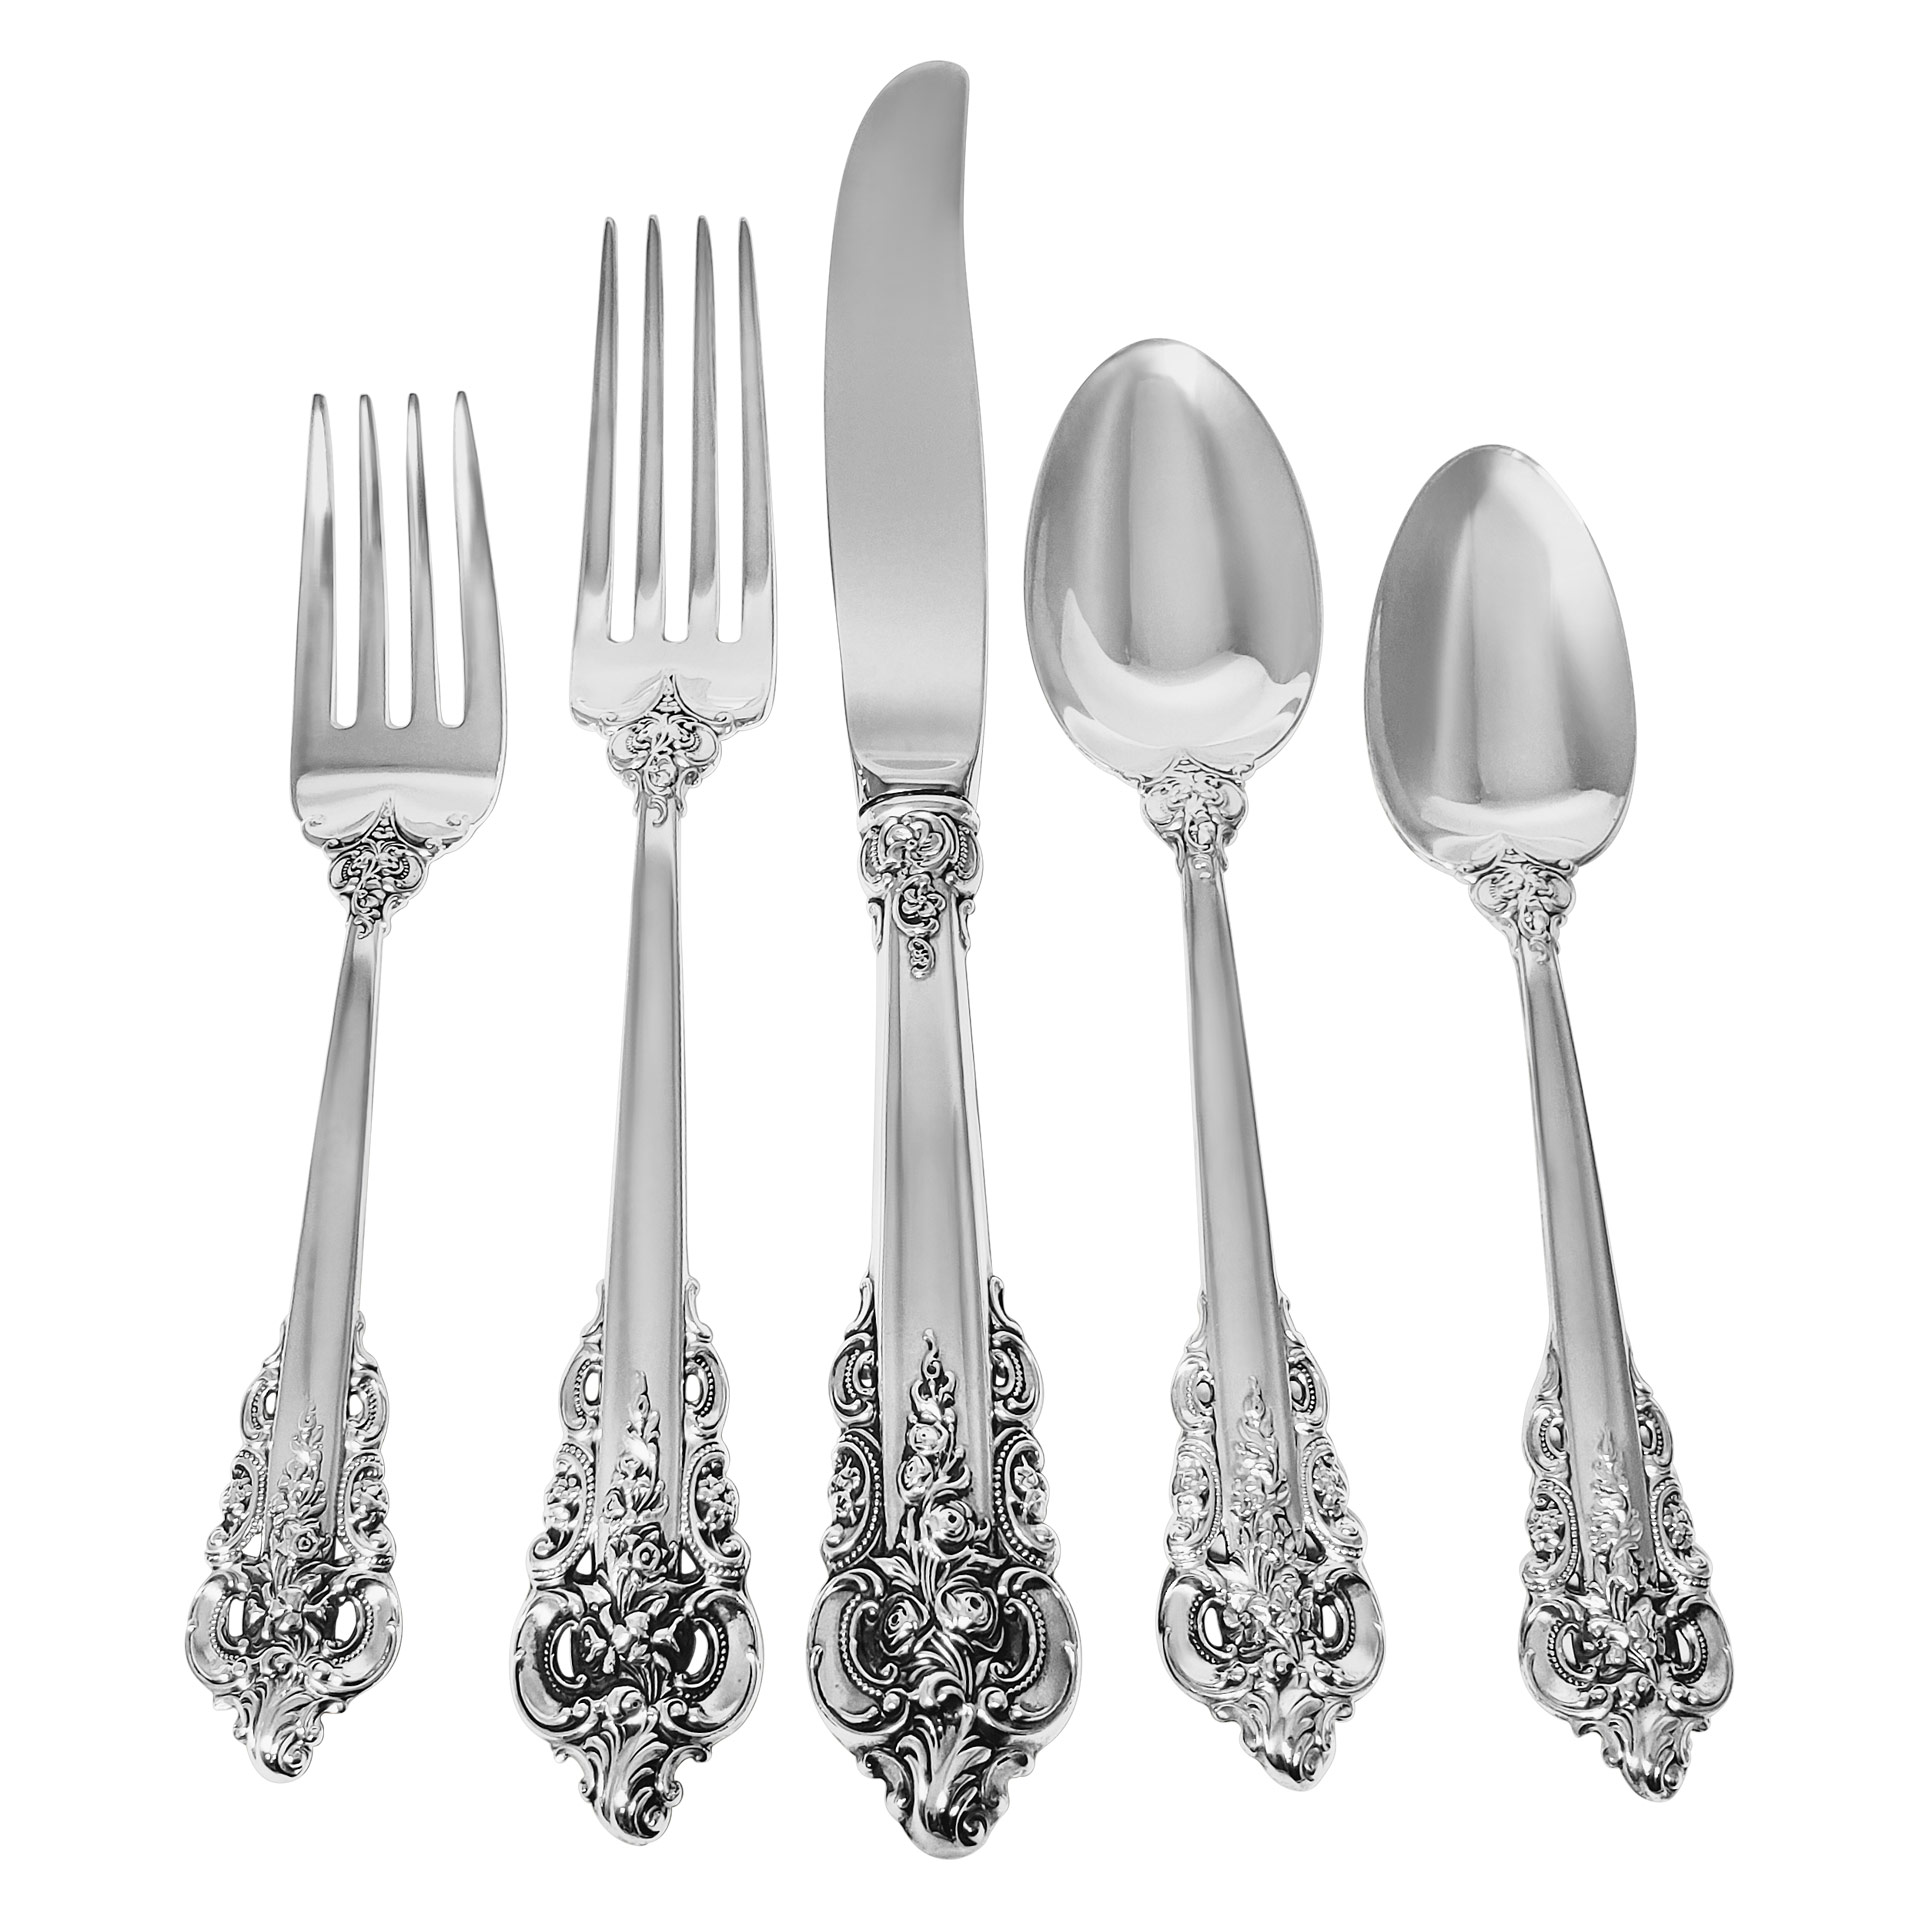 "GRANDE BAROQUE" Sterling Silver Flatware Set, patented by Wallace in 1941- 5 place setting for 24 + 14 serving pieces. Over 7500 grams of sterling silver. image 1